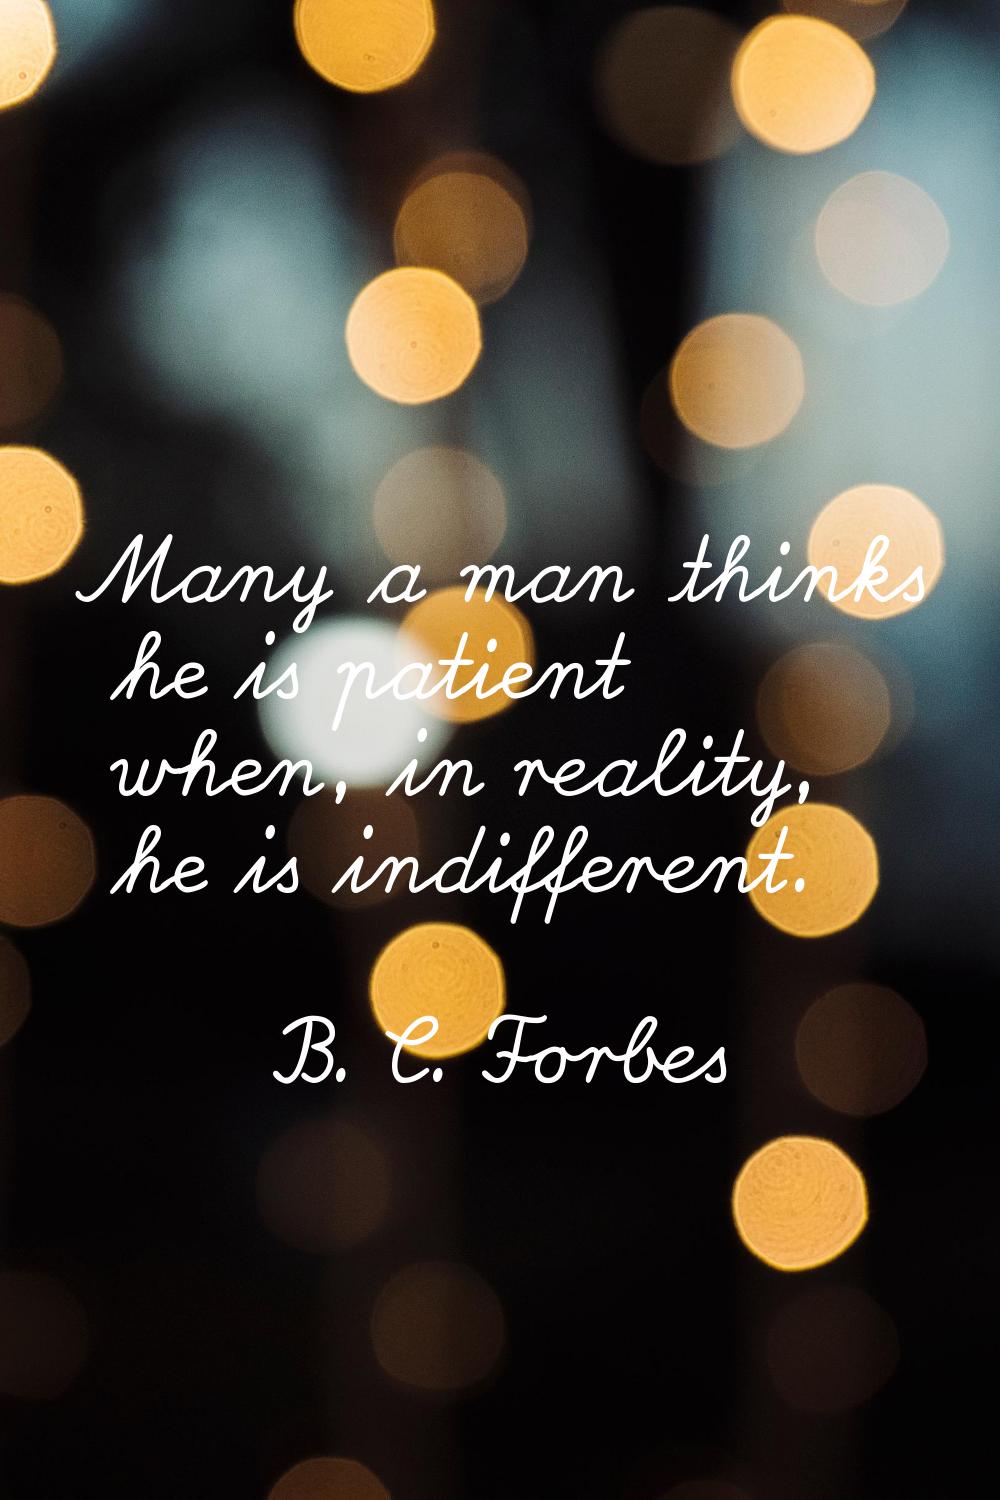 Many a man thinks he is patient when, in reality, he is indifferent.